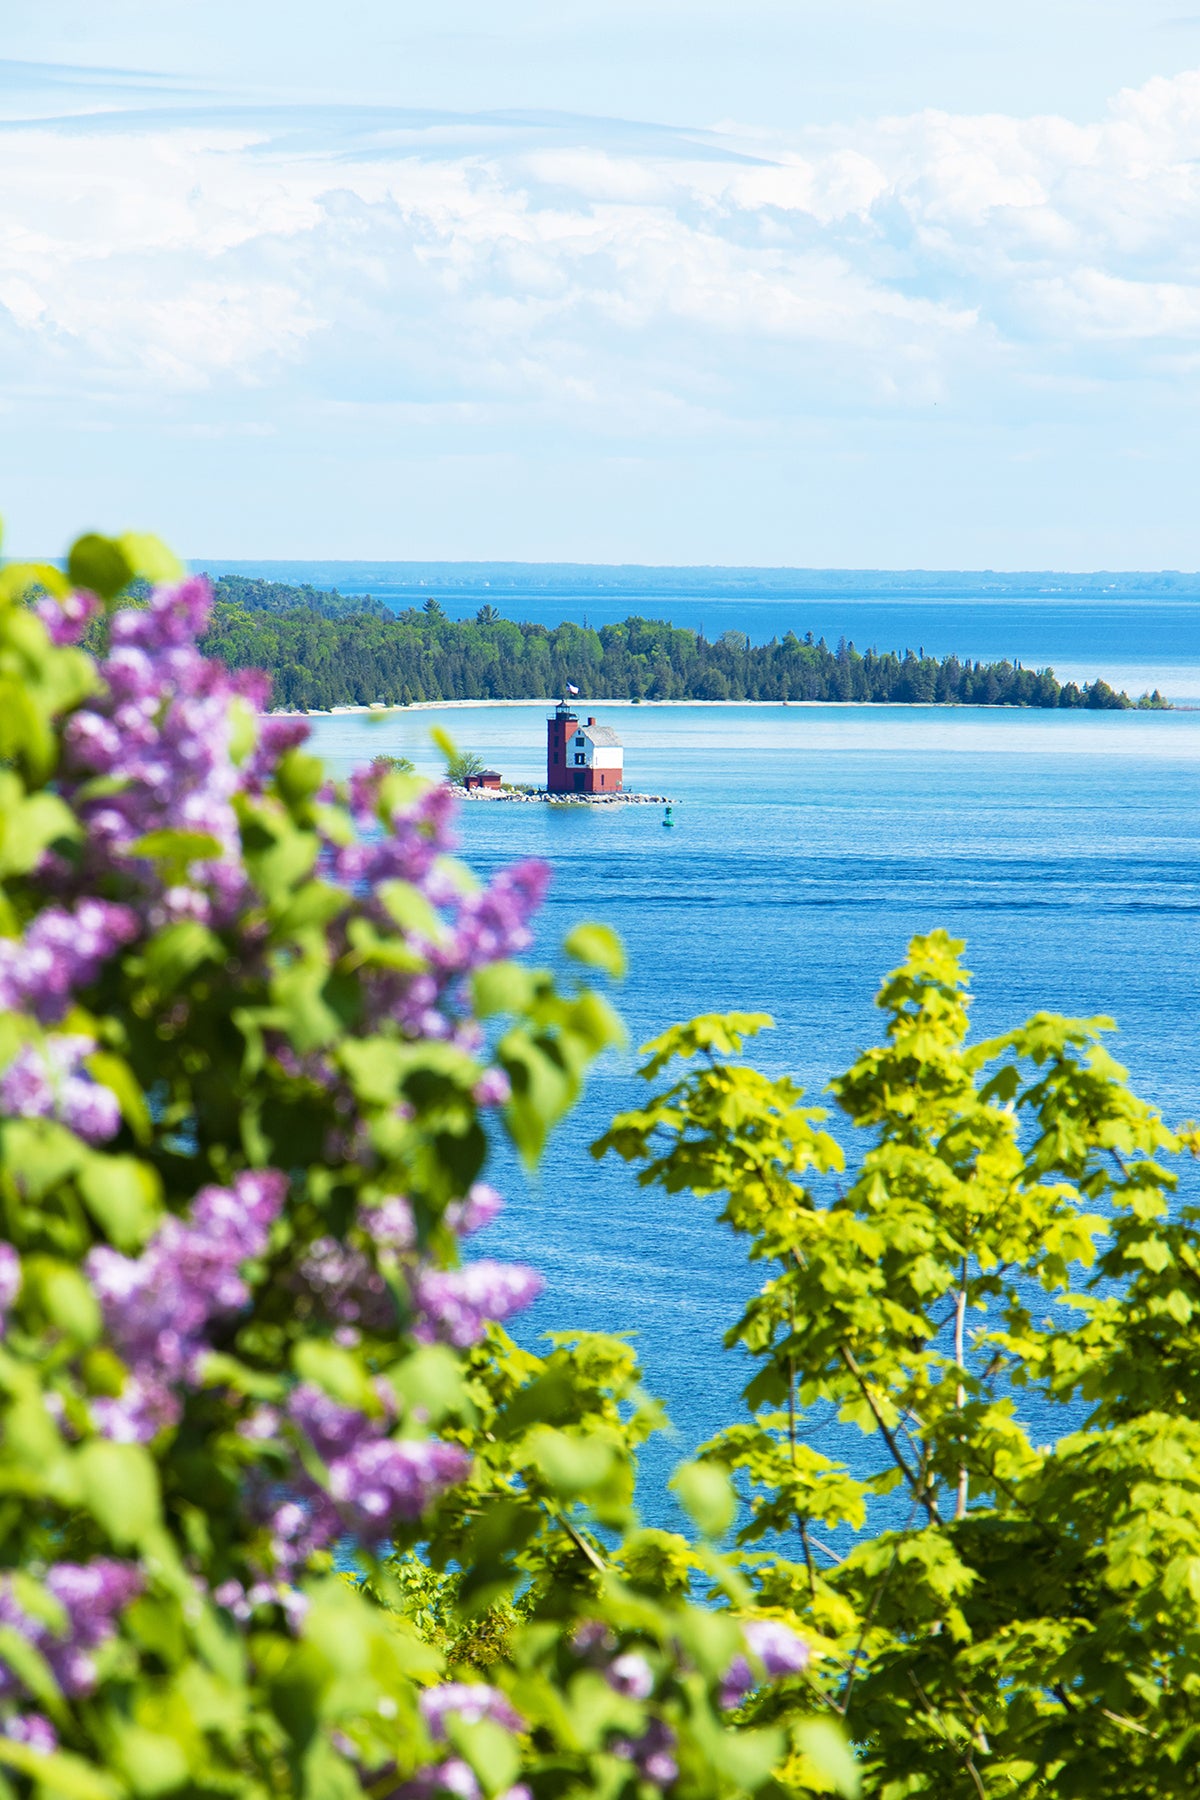 Lilac View of Round Island Photograph by Jennifer Wohletz of Mackinac Memories.